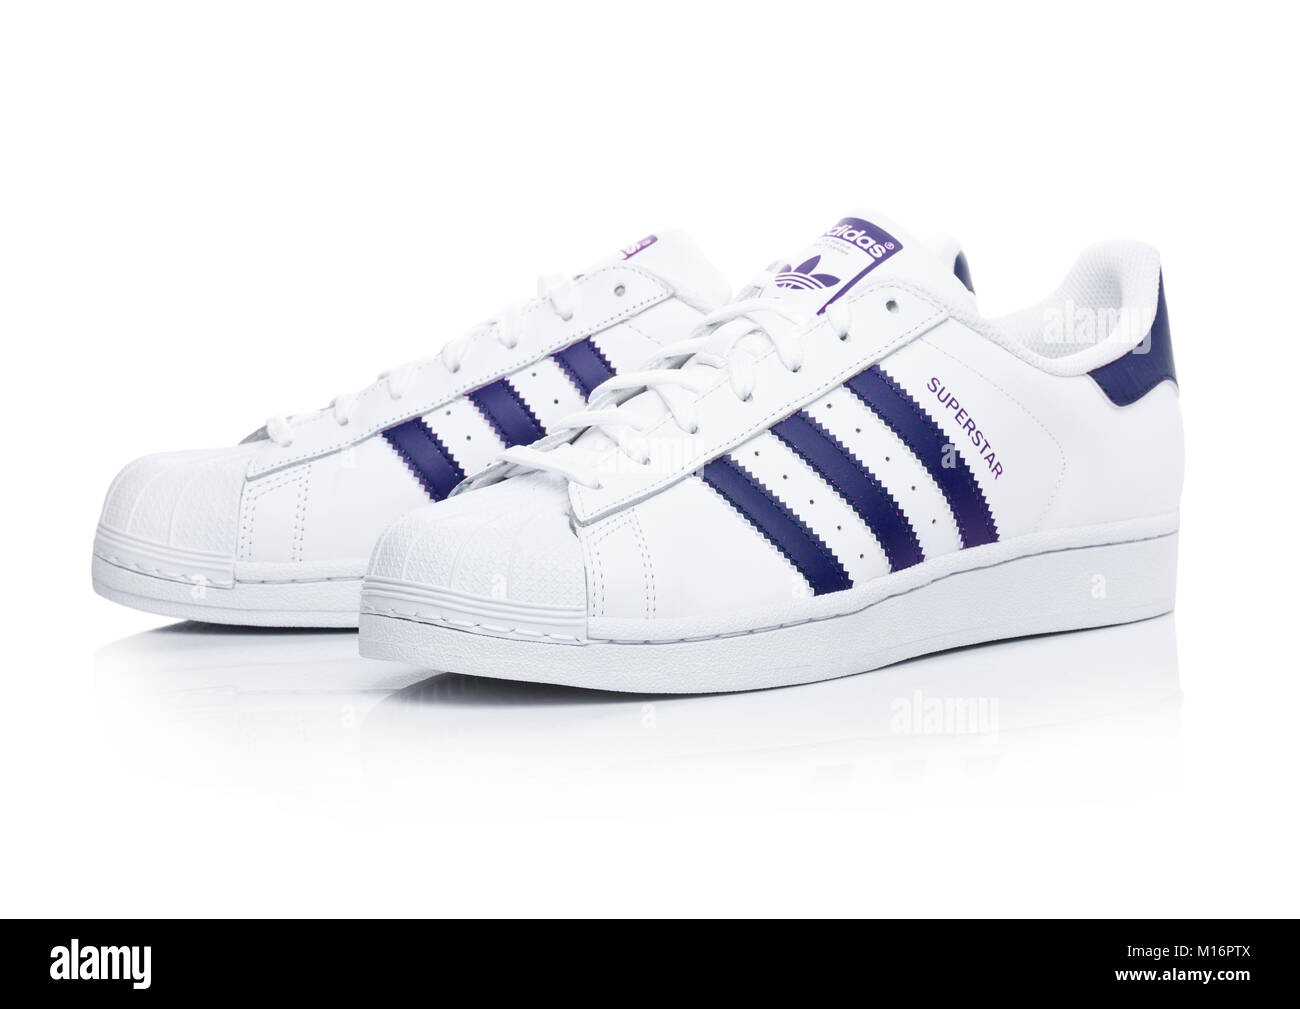 LONDON, UK - JANUARY 24, 2018: Adidas Originals Superstar blue shoes on  white background.German multinational corporation that designs and  manufacture Stock Photo - Alamy